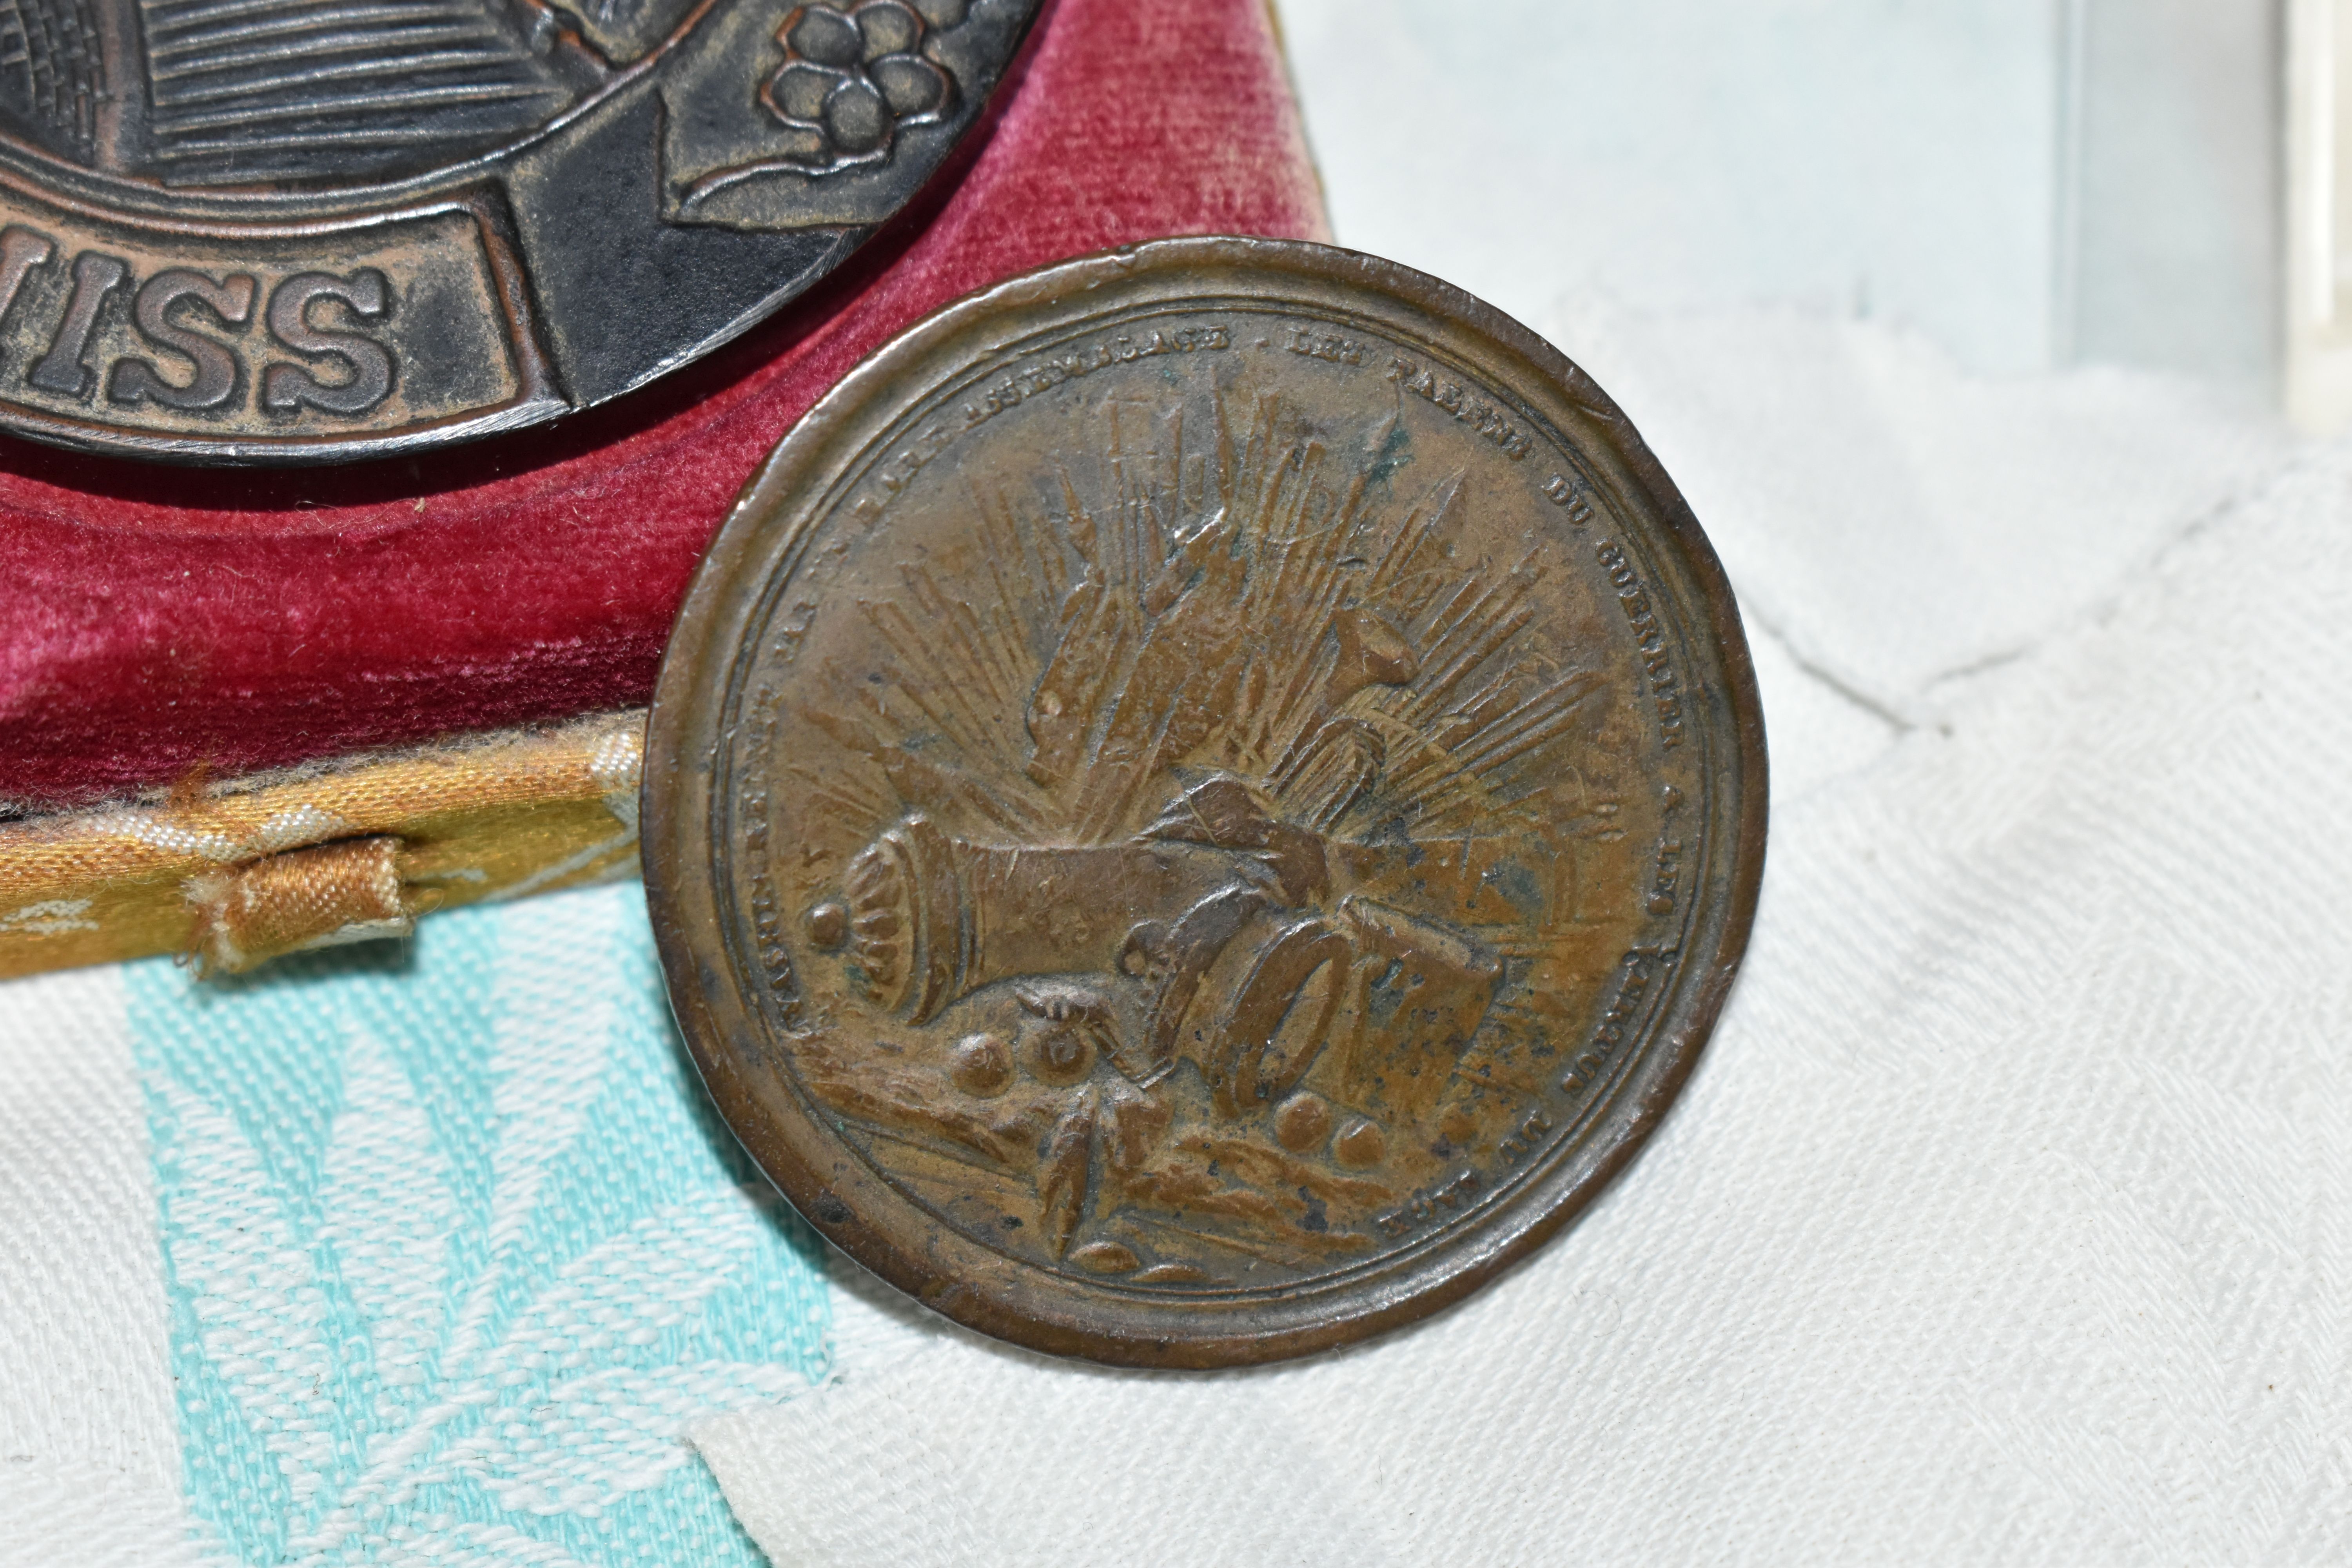 A SMALL VINTAGE SUITCASE CONTAINING A BRONZE GEORGE WASHINGTON MEDAL DESIGNED BY VOLTAIRE, 1778 - Image 7 of 8